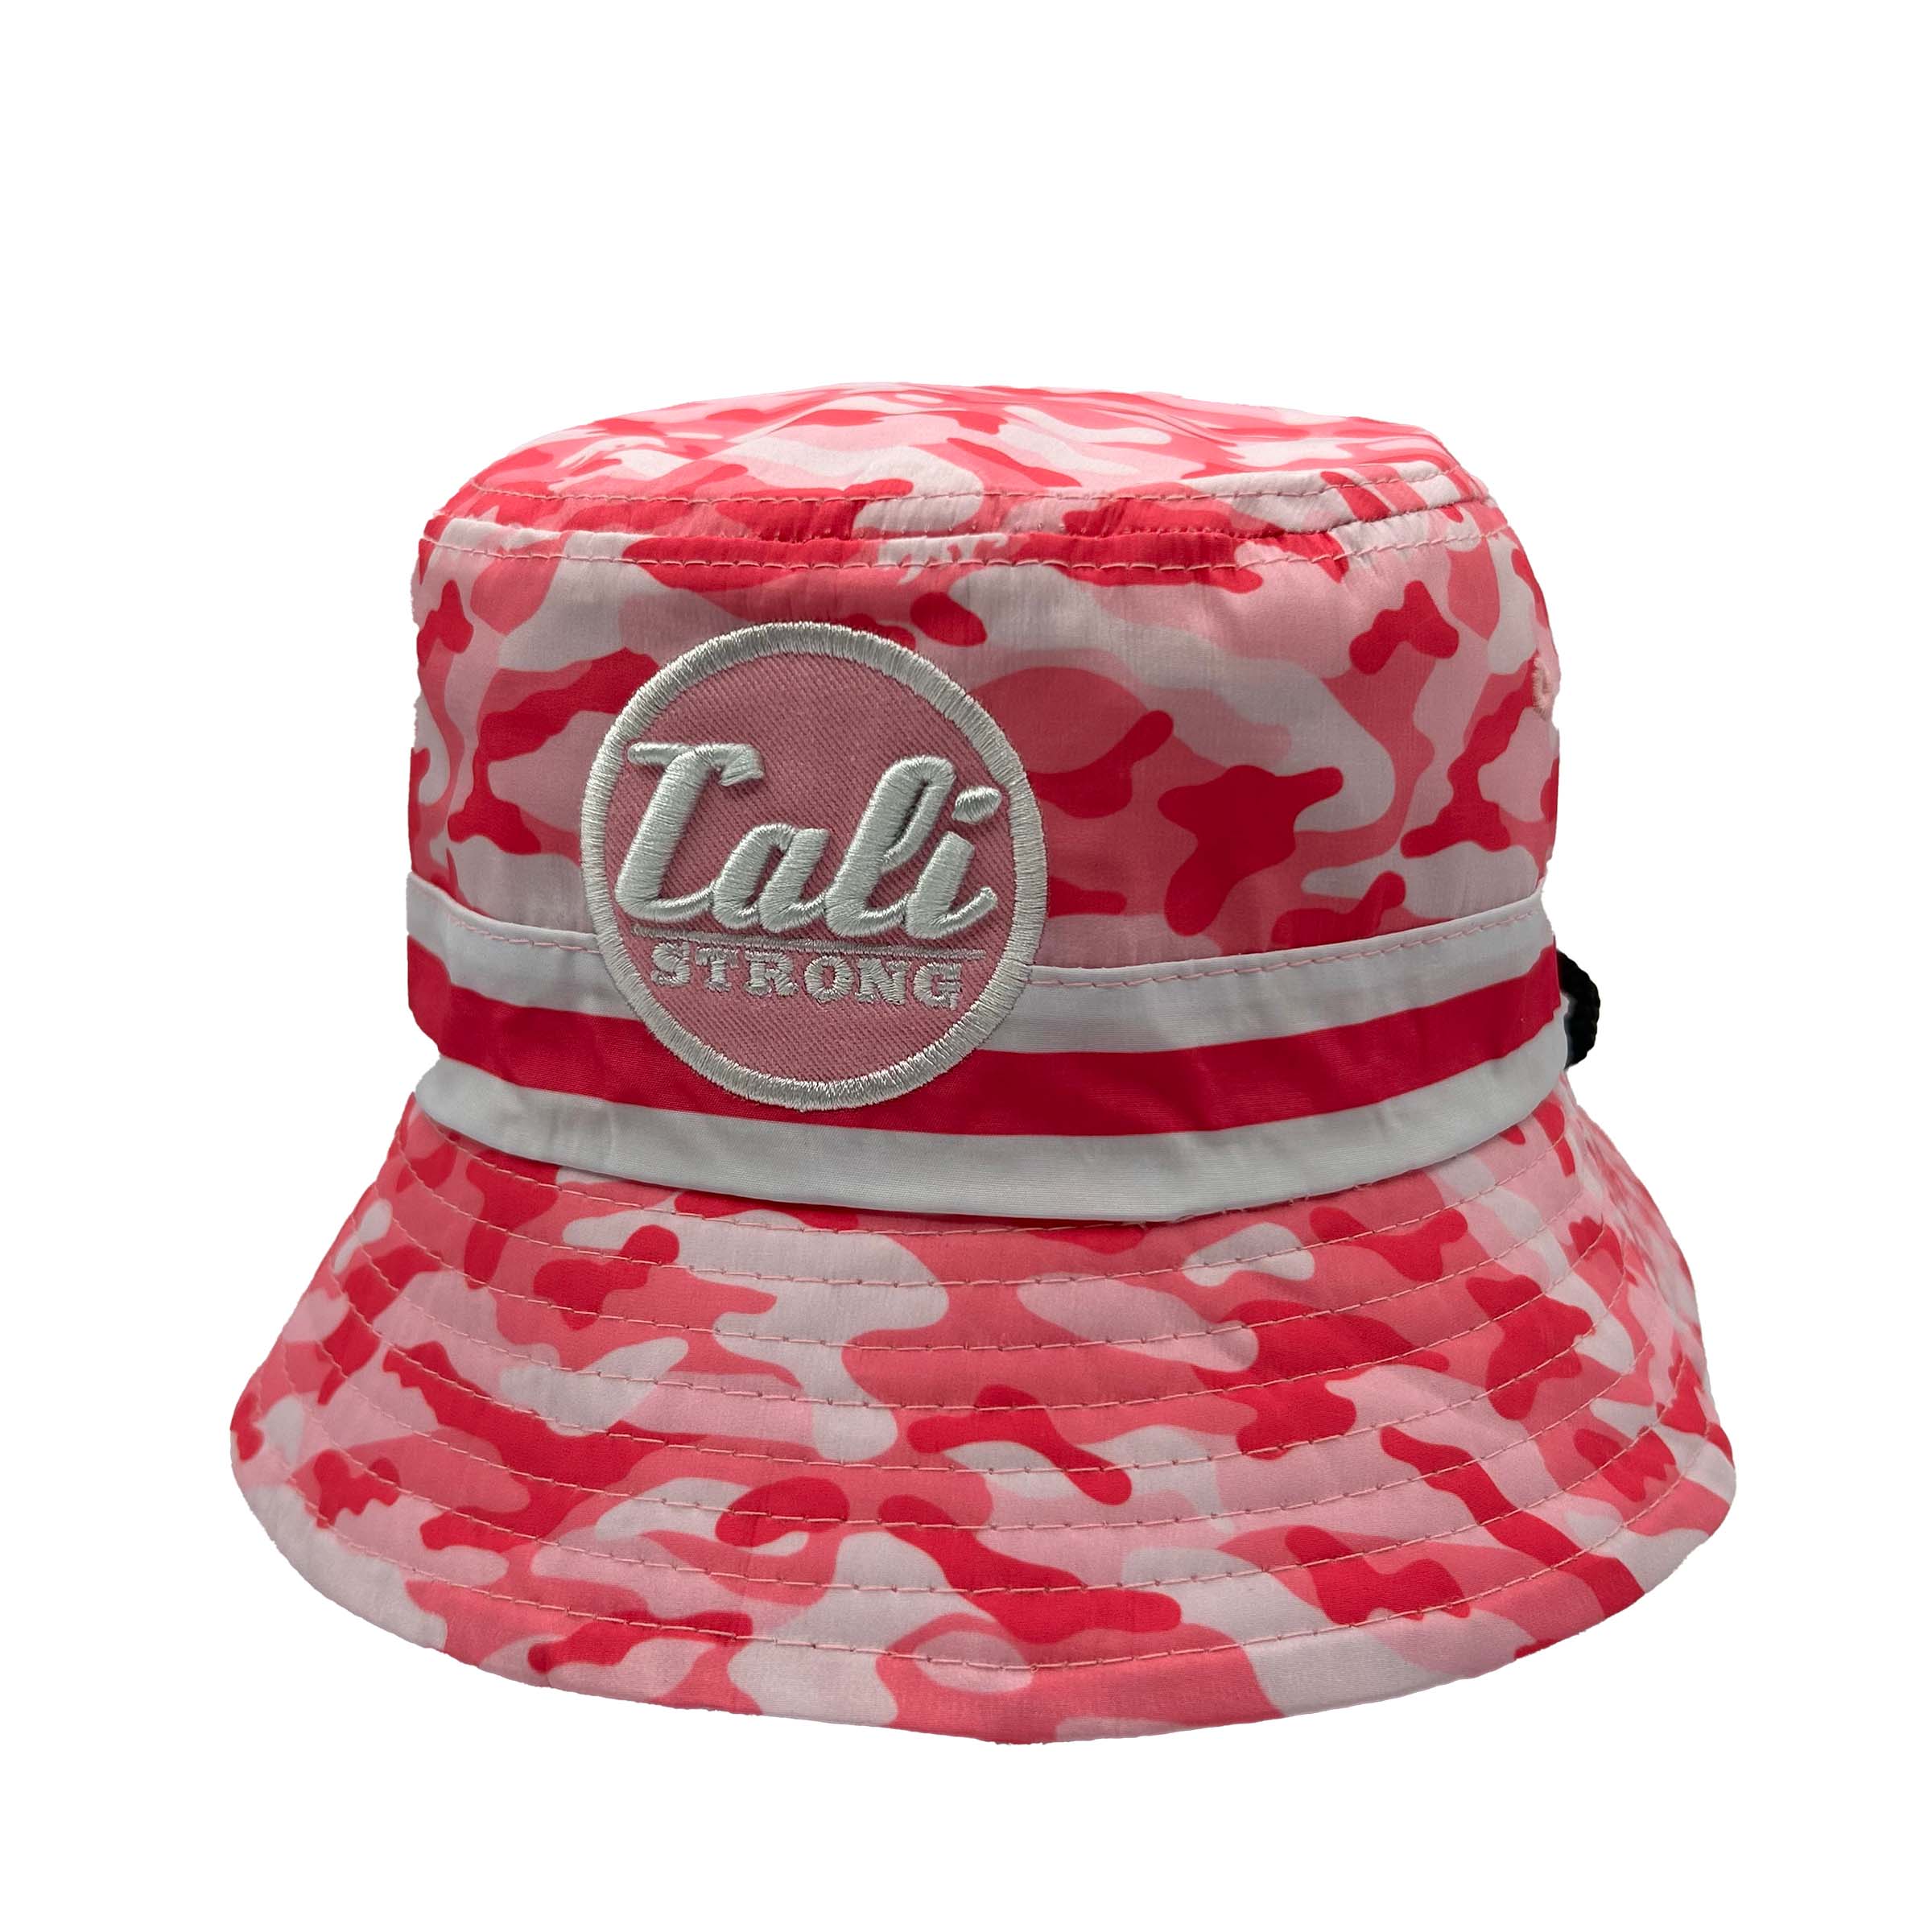 CALI Strong Pink Camo Reversible Bucket Hat Tactical Morale Patch - Bucket Hat - Image 3 - CALI Strong